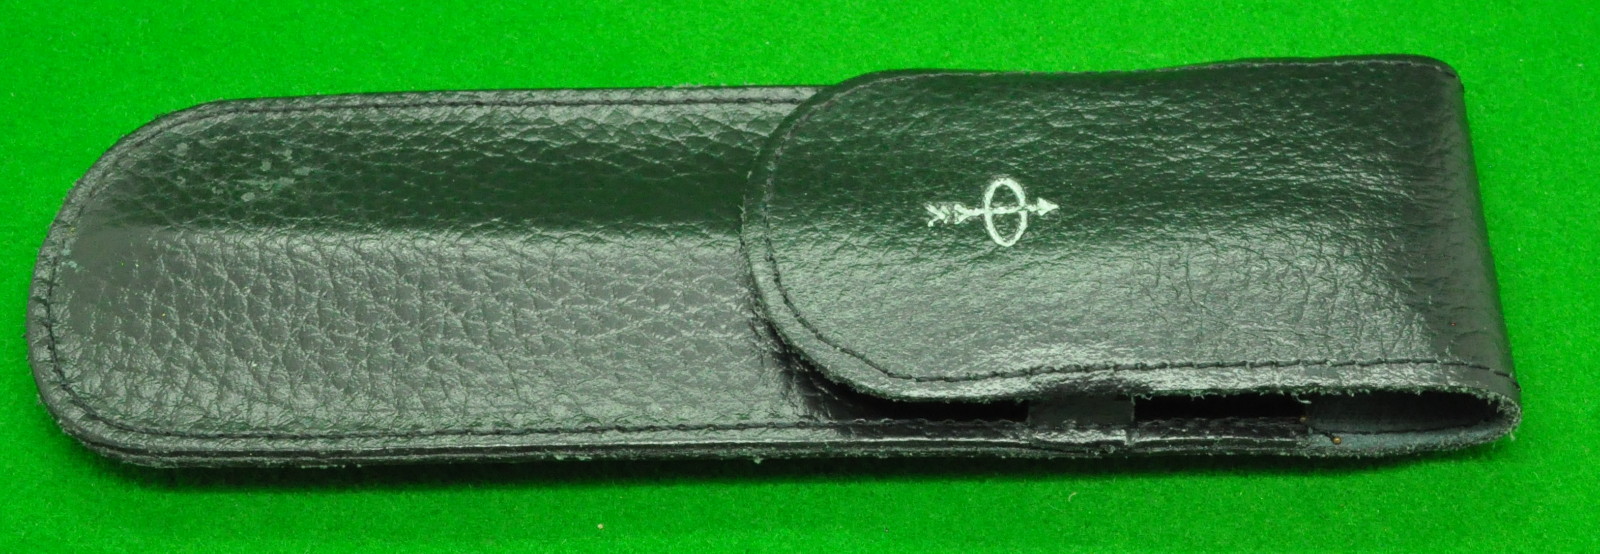 PARKER TWIN GREEN LEATHER PEN POUCH/CASE-FRANCE-BOXED-NEW OLD STOCK. 